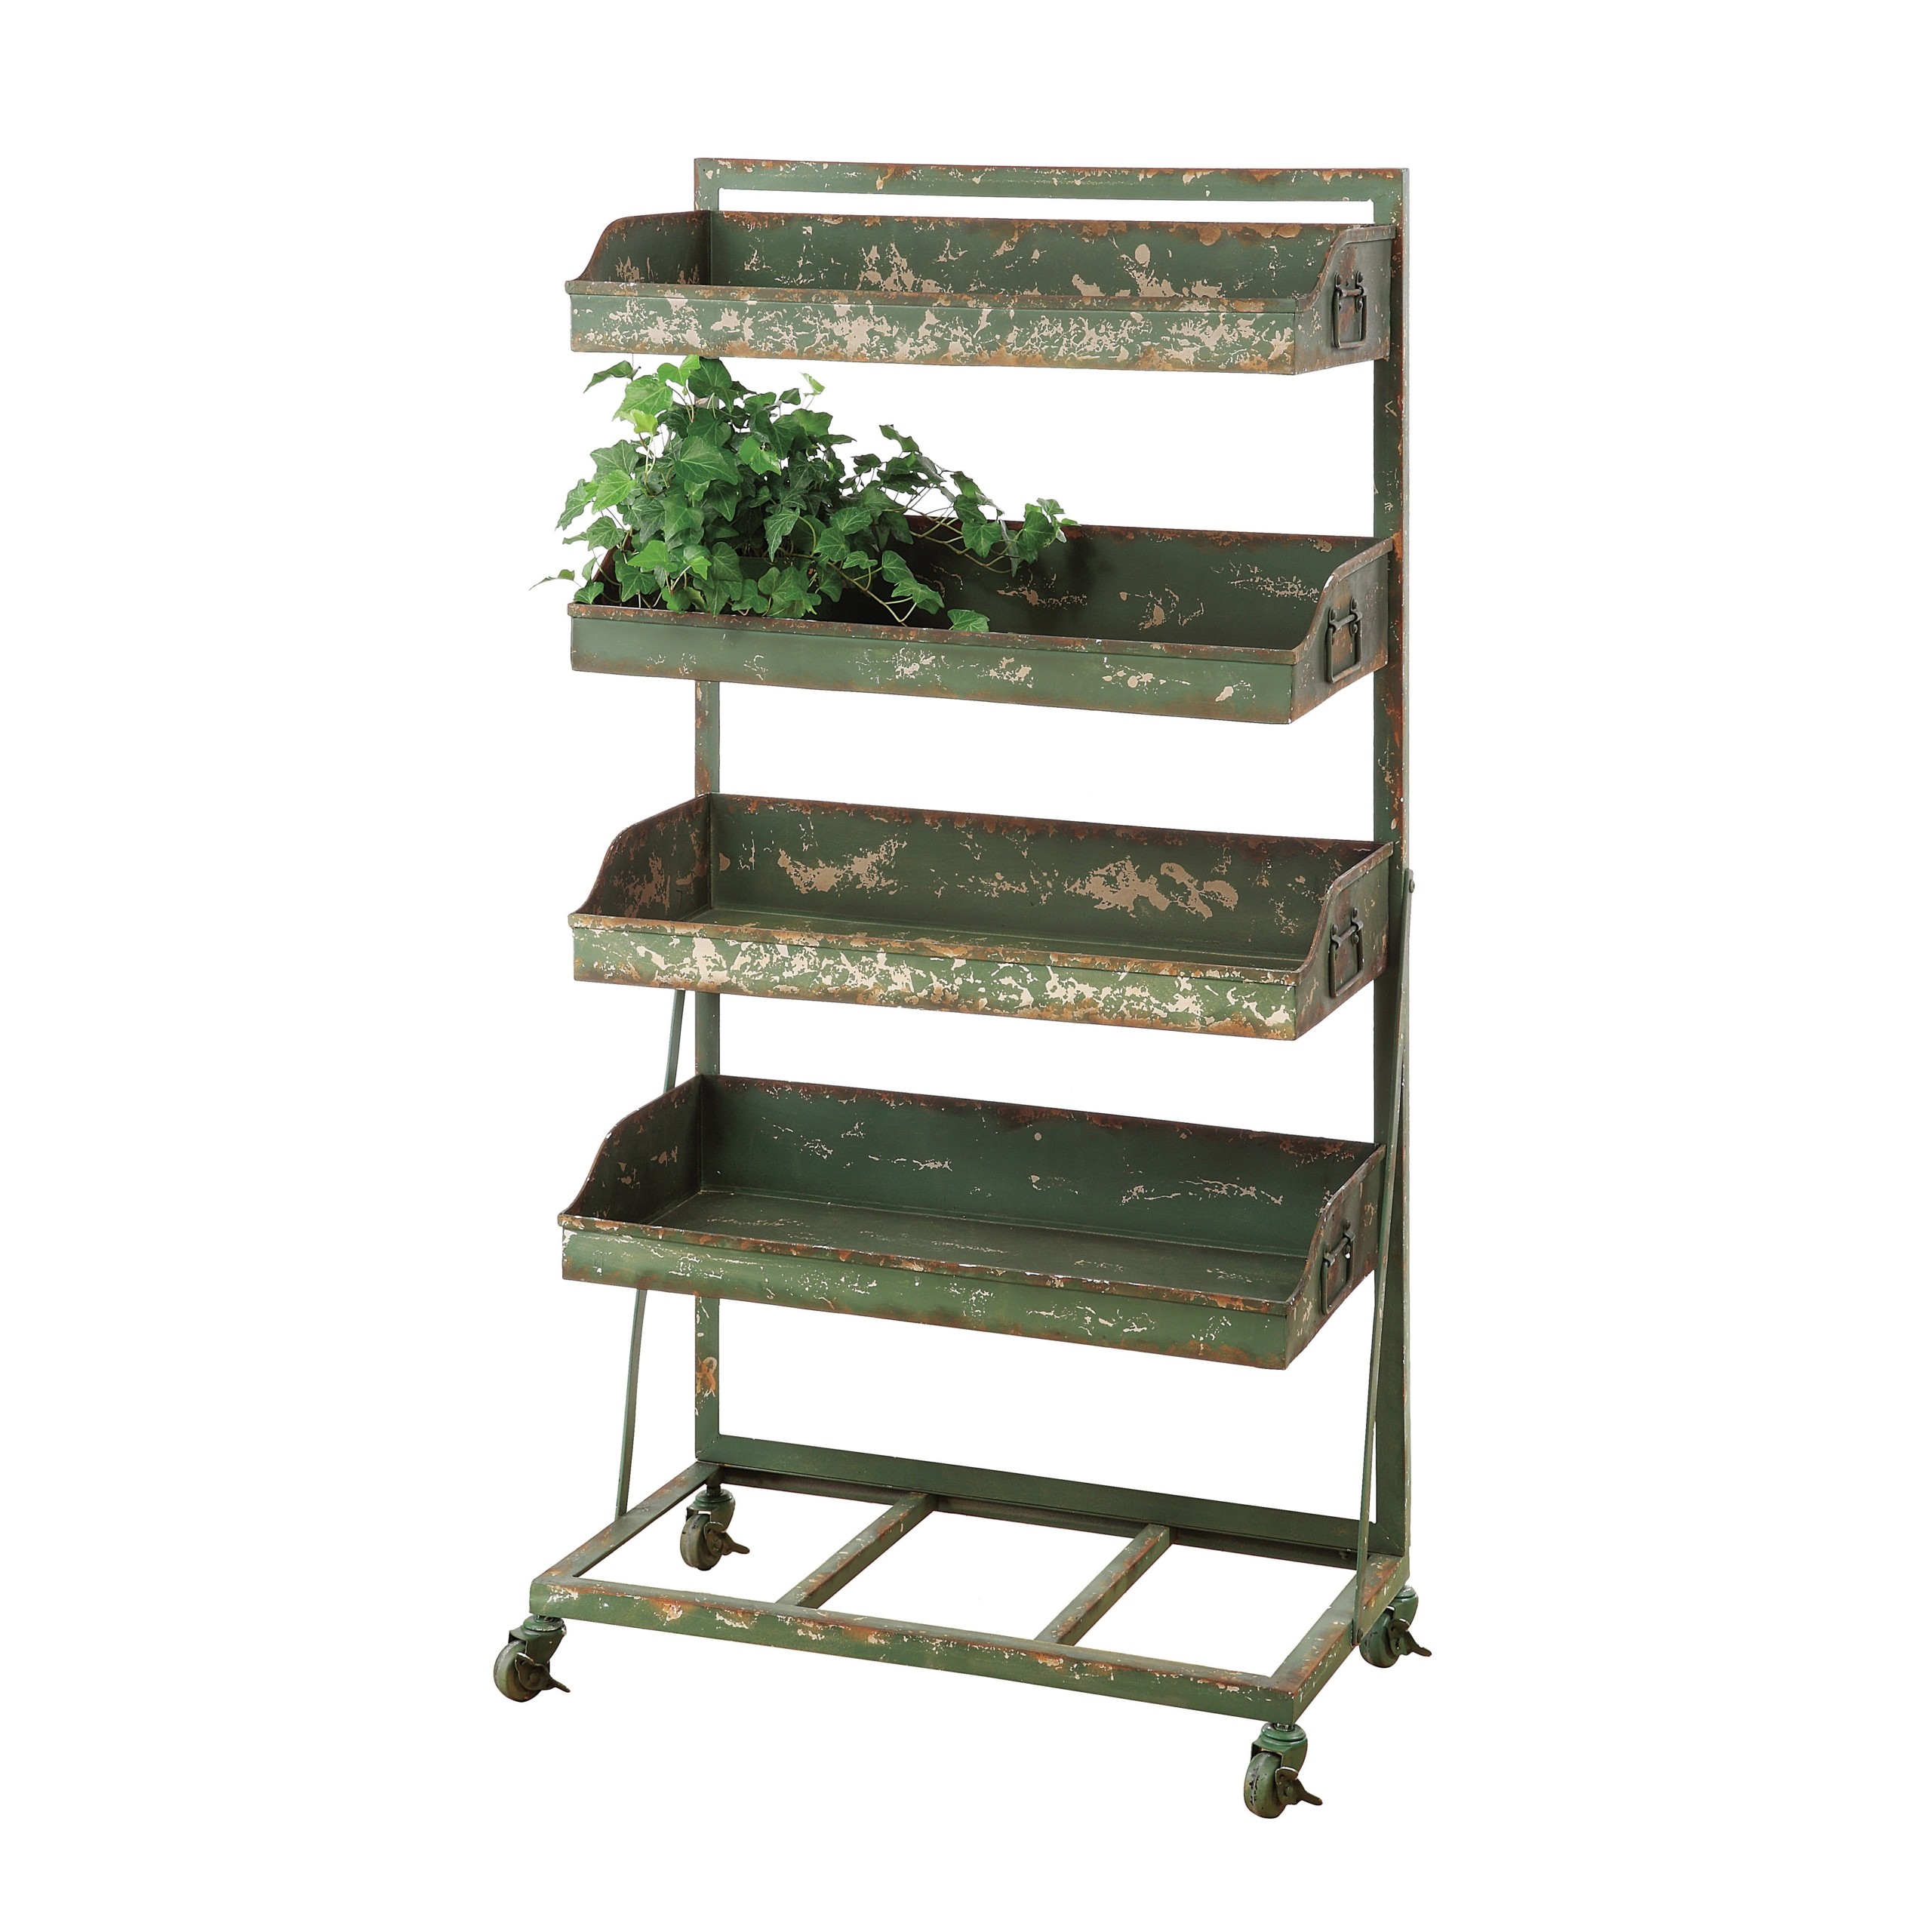 Ideal as a plant stand or general shelving Olive Grove Versailles Metal 4 Tier Rack